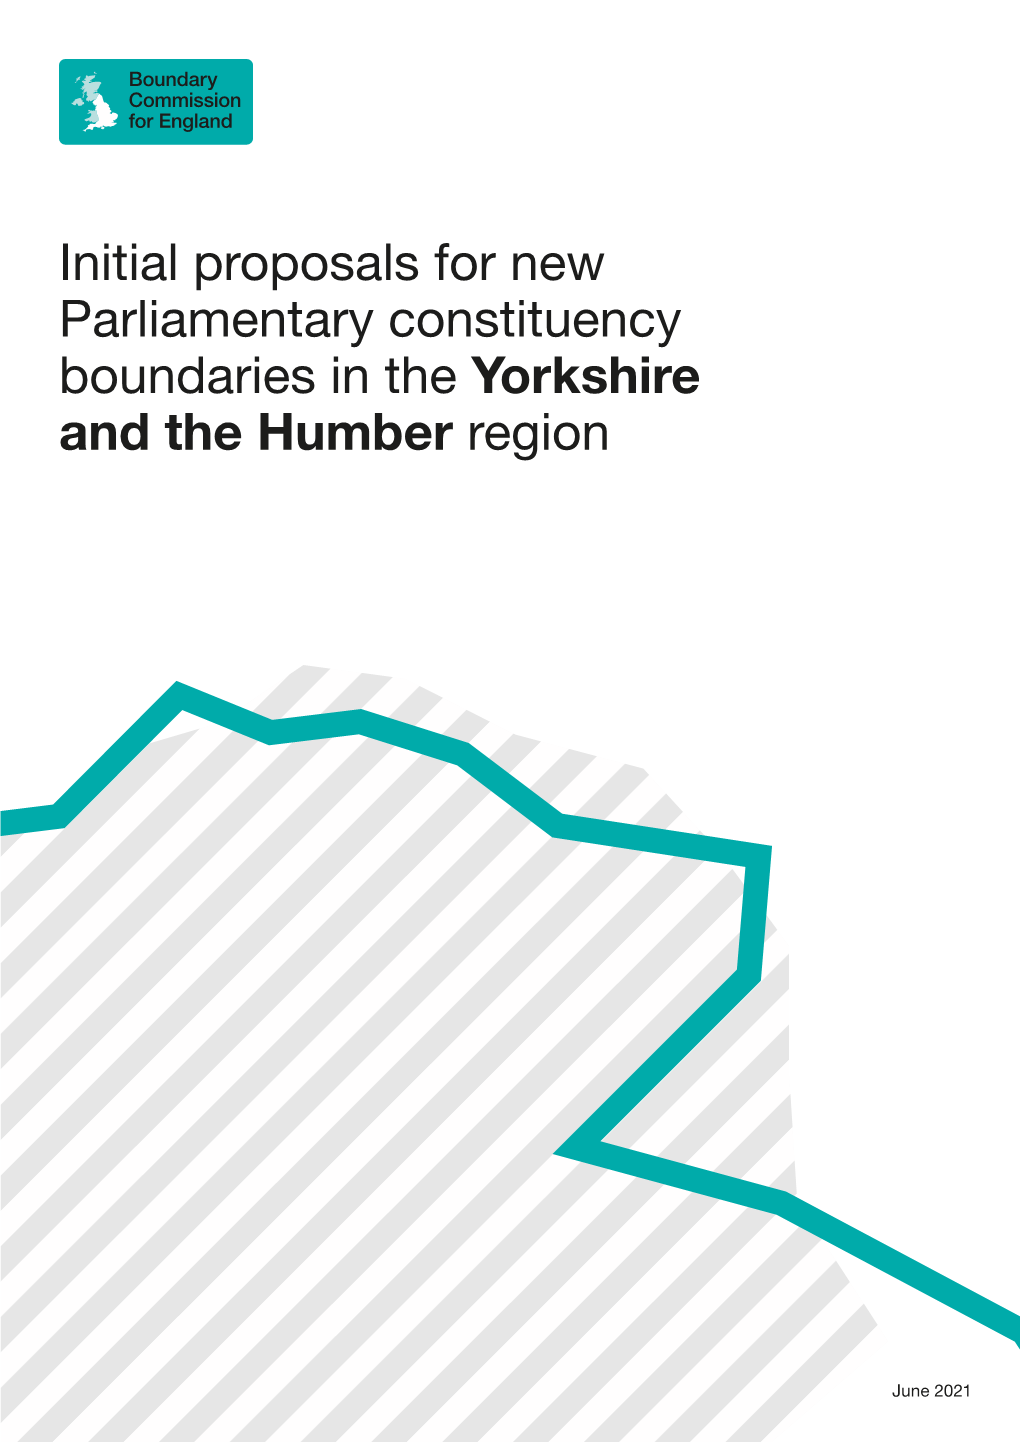 Initial Proposals for New Parliamentary Constituency Boundaries in the Yorkshire and the Humber Region